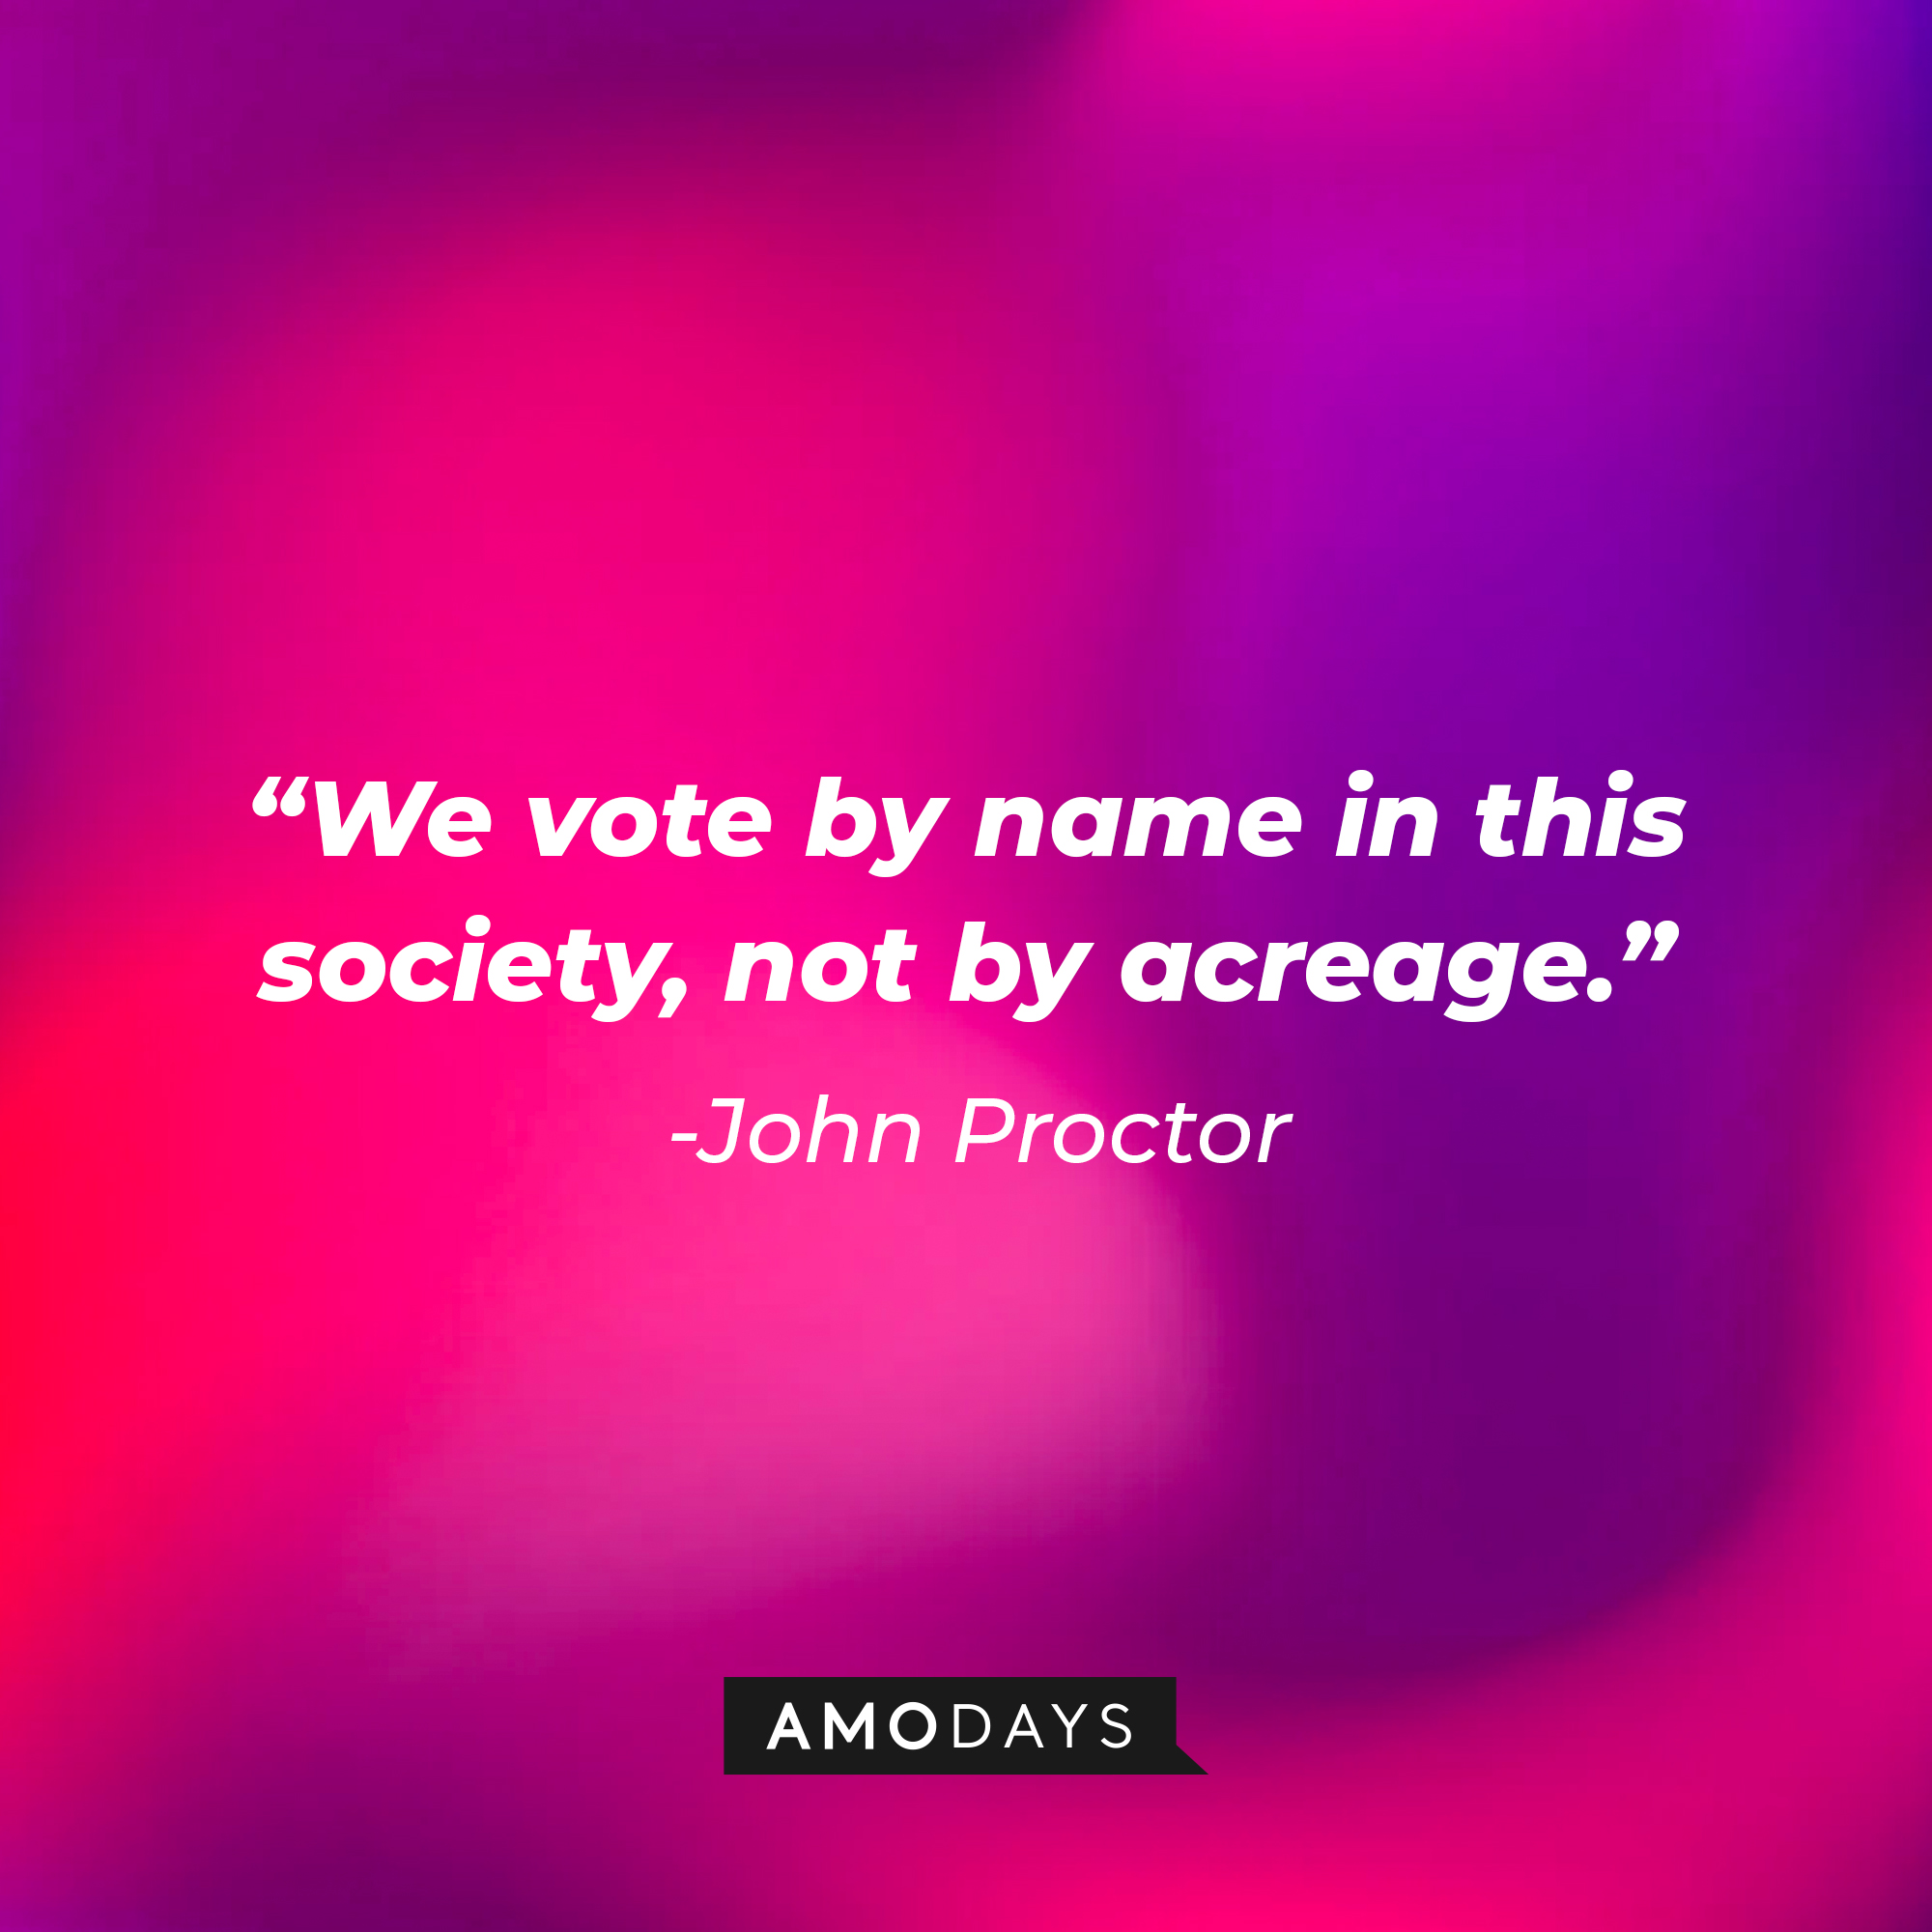 John Proctor's quote: "We vote by name in this society, not by acreage." | Image: AmoDays